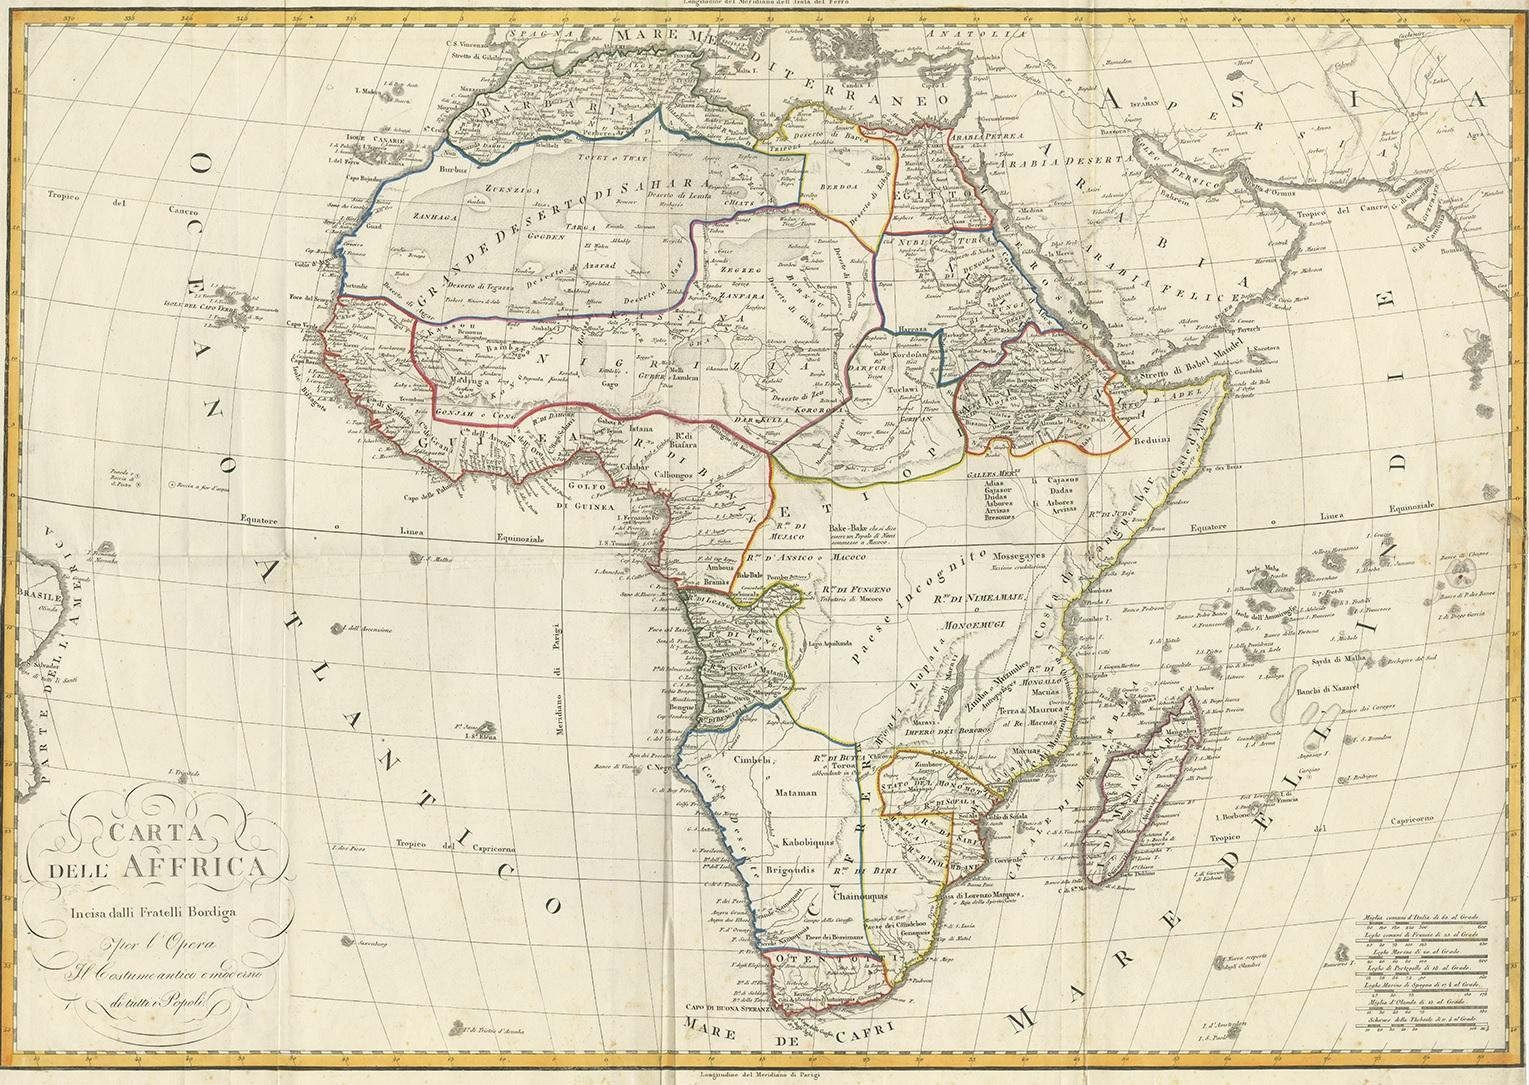 Antique map titled 'Carta dell Africa'. Large and quite scarce Italian map of Africa, reflecting the then-current knowledge of the continent's geography, with large areas left completely blank. Where known, the map gives good detail of the